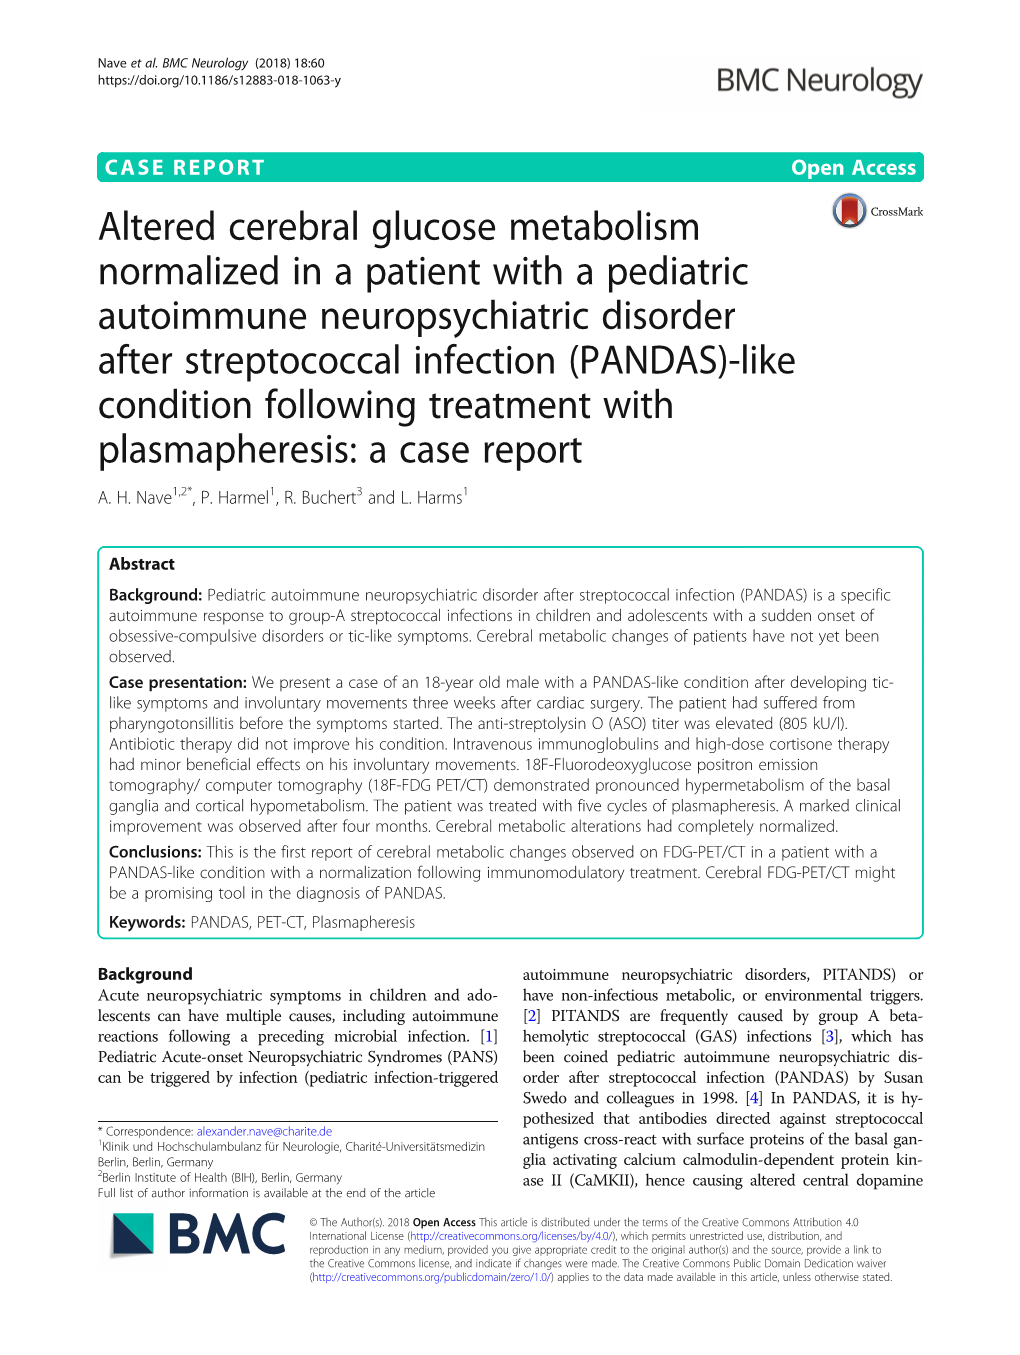 Altered Cerebral Glucose Metabolism Normalized in a Patient with a Pediatric Autoimmune Neuropsychiatric Disorder After Streptoc